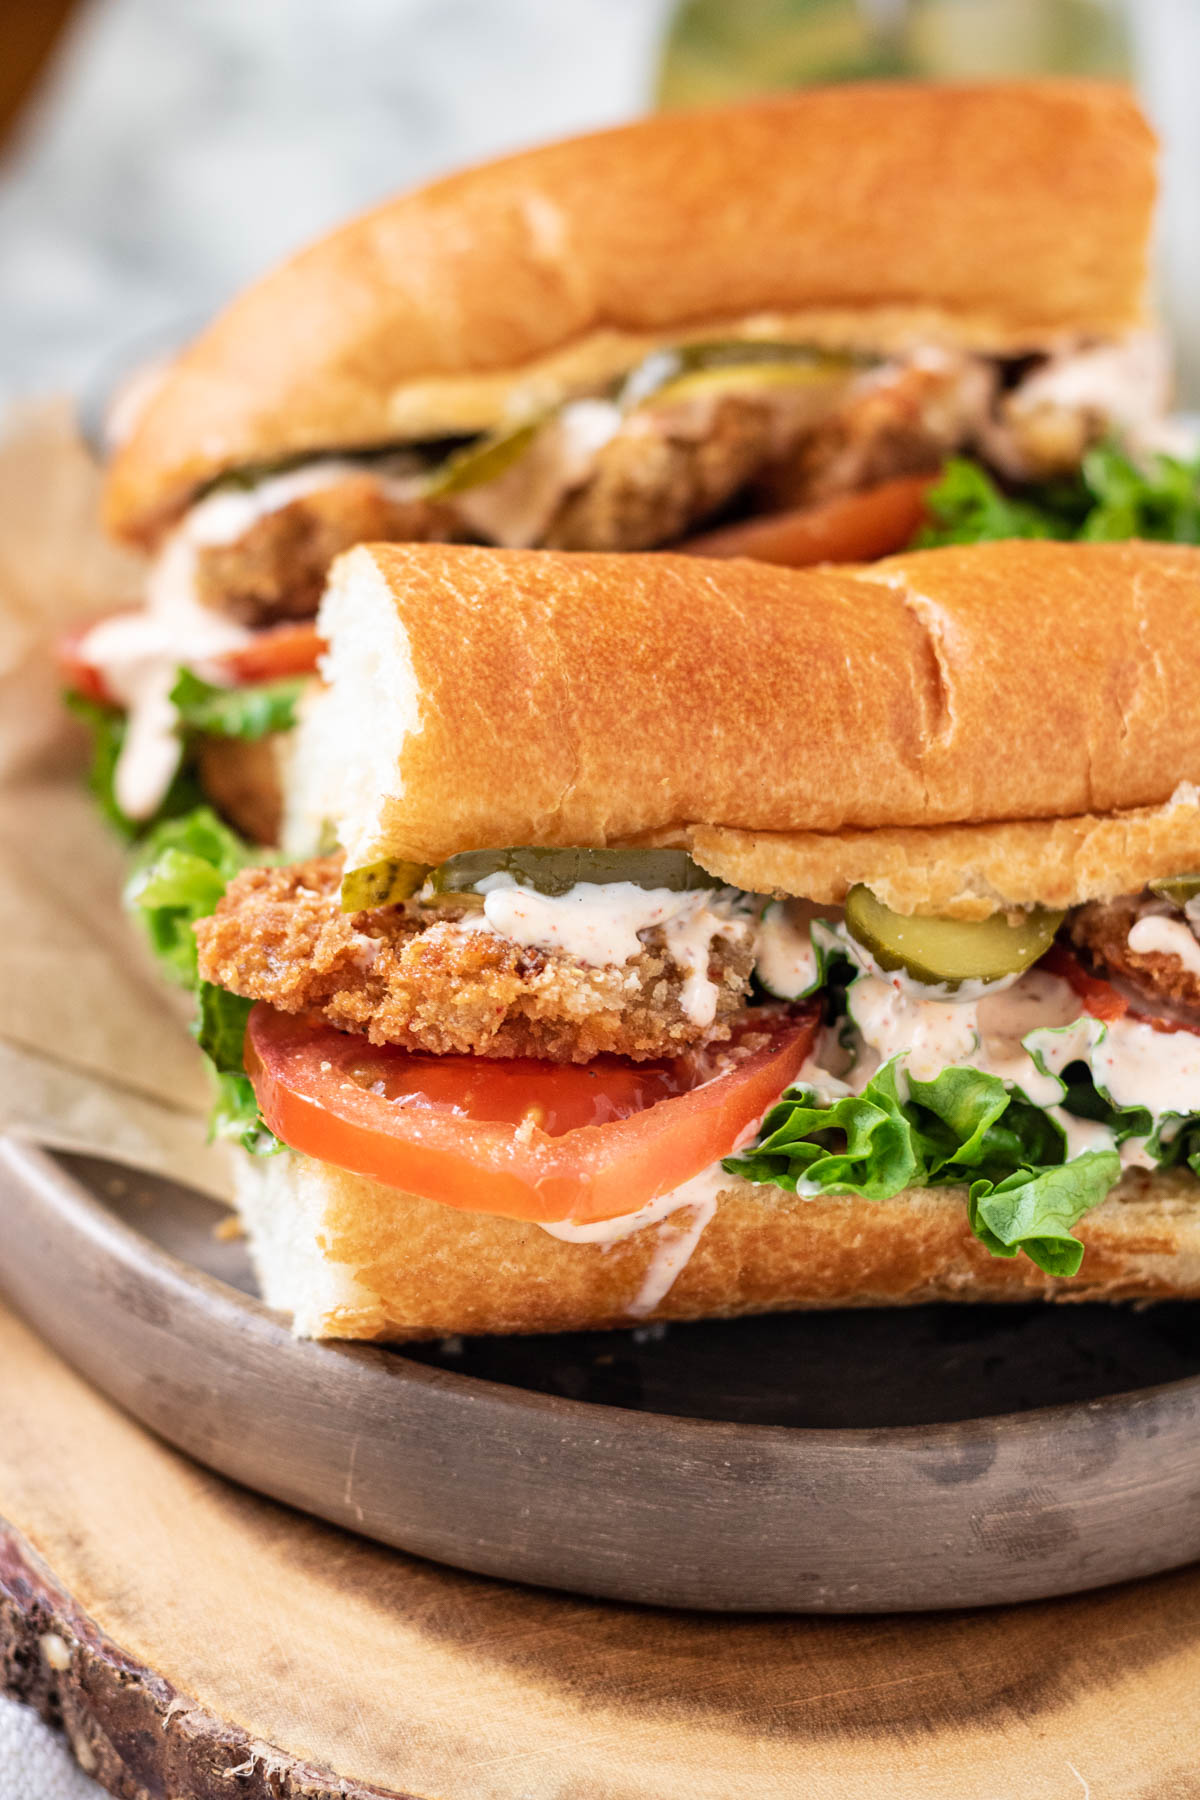 A sandwich filled with mushrooms, lettuce and tomato, on a wood platter.